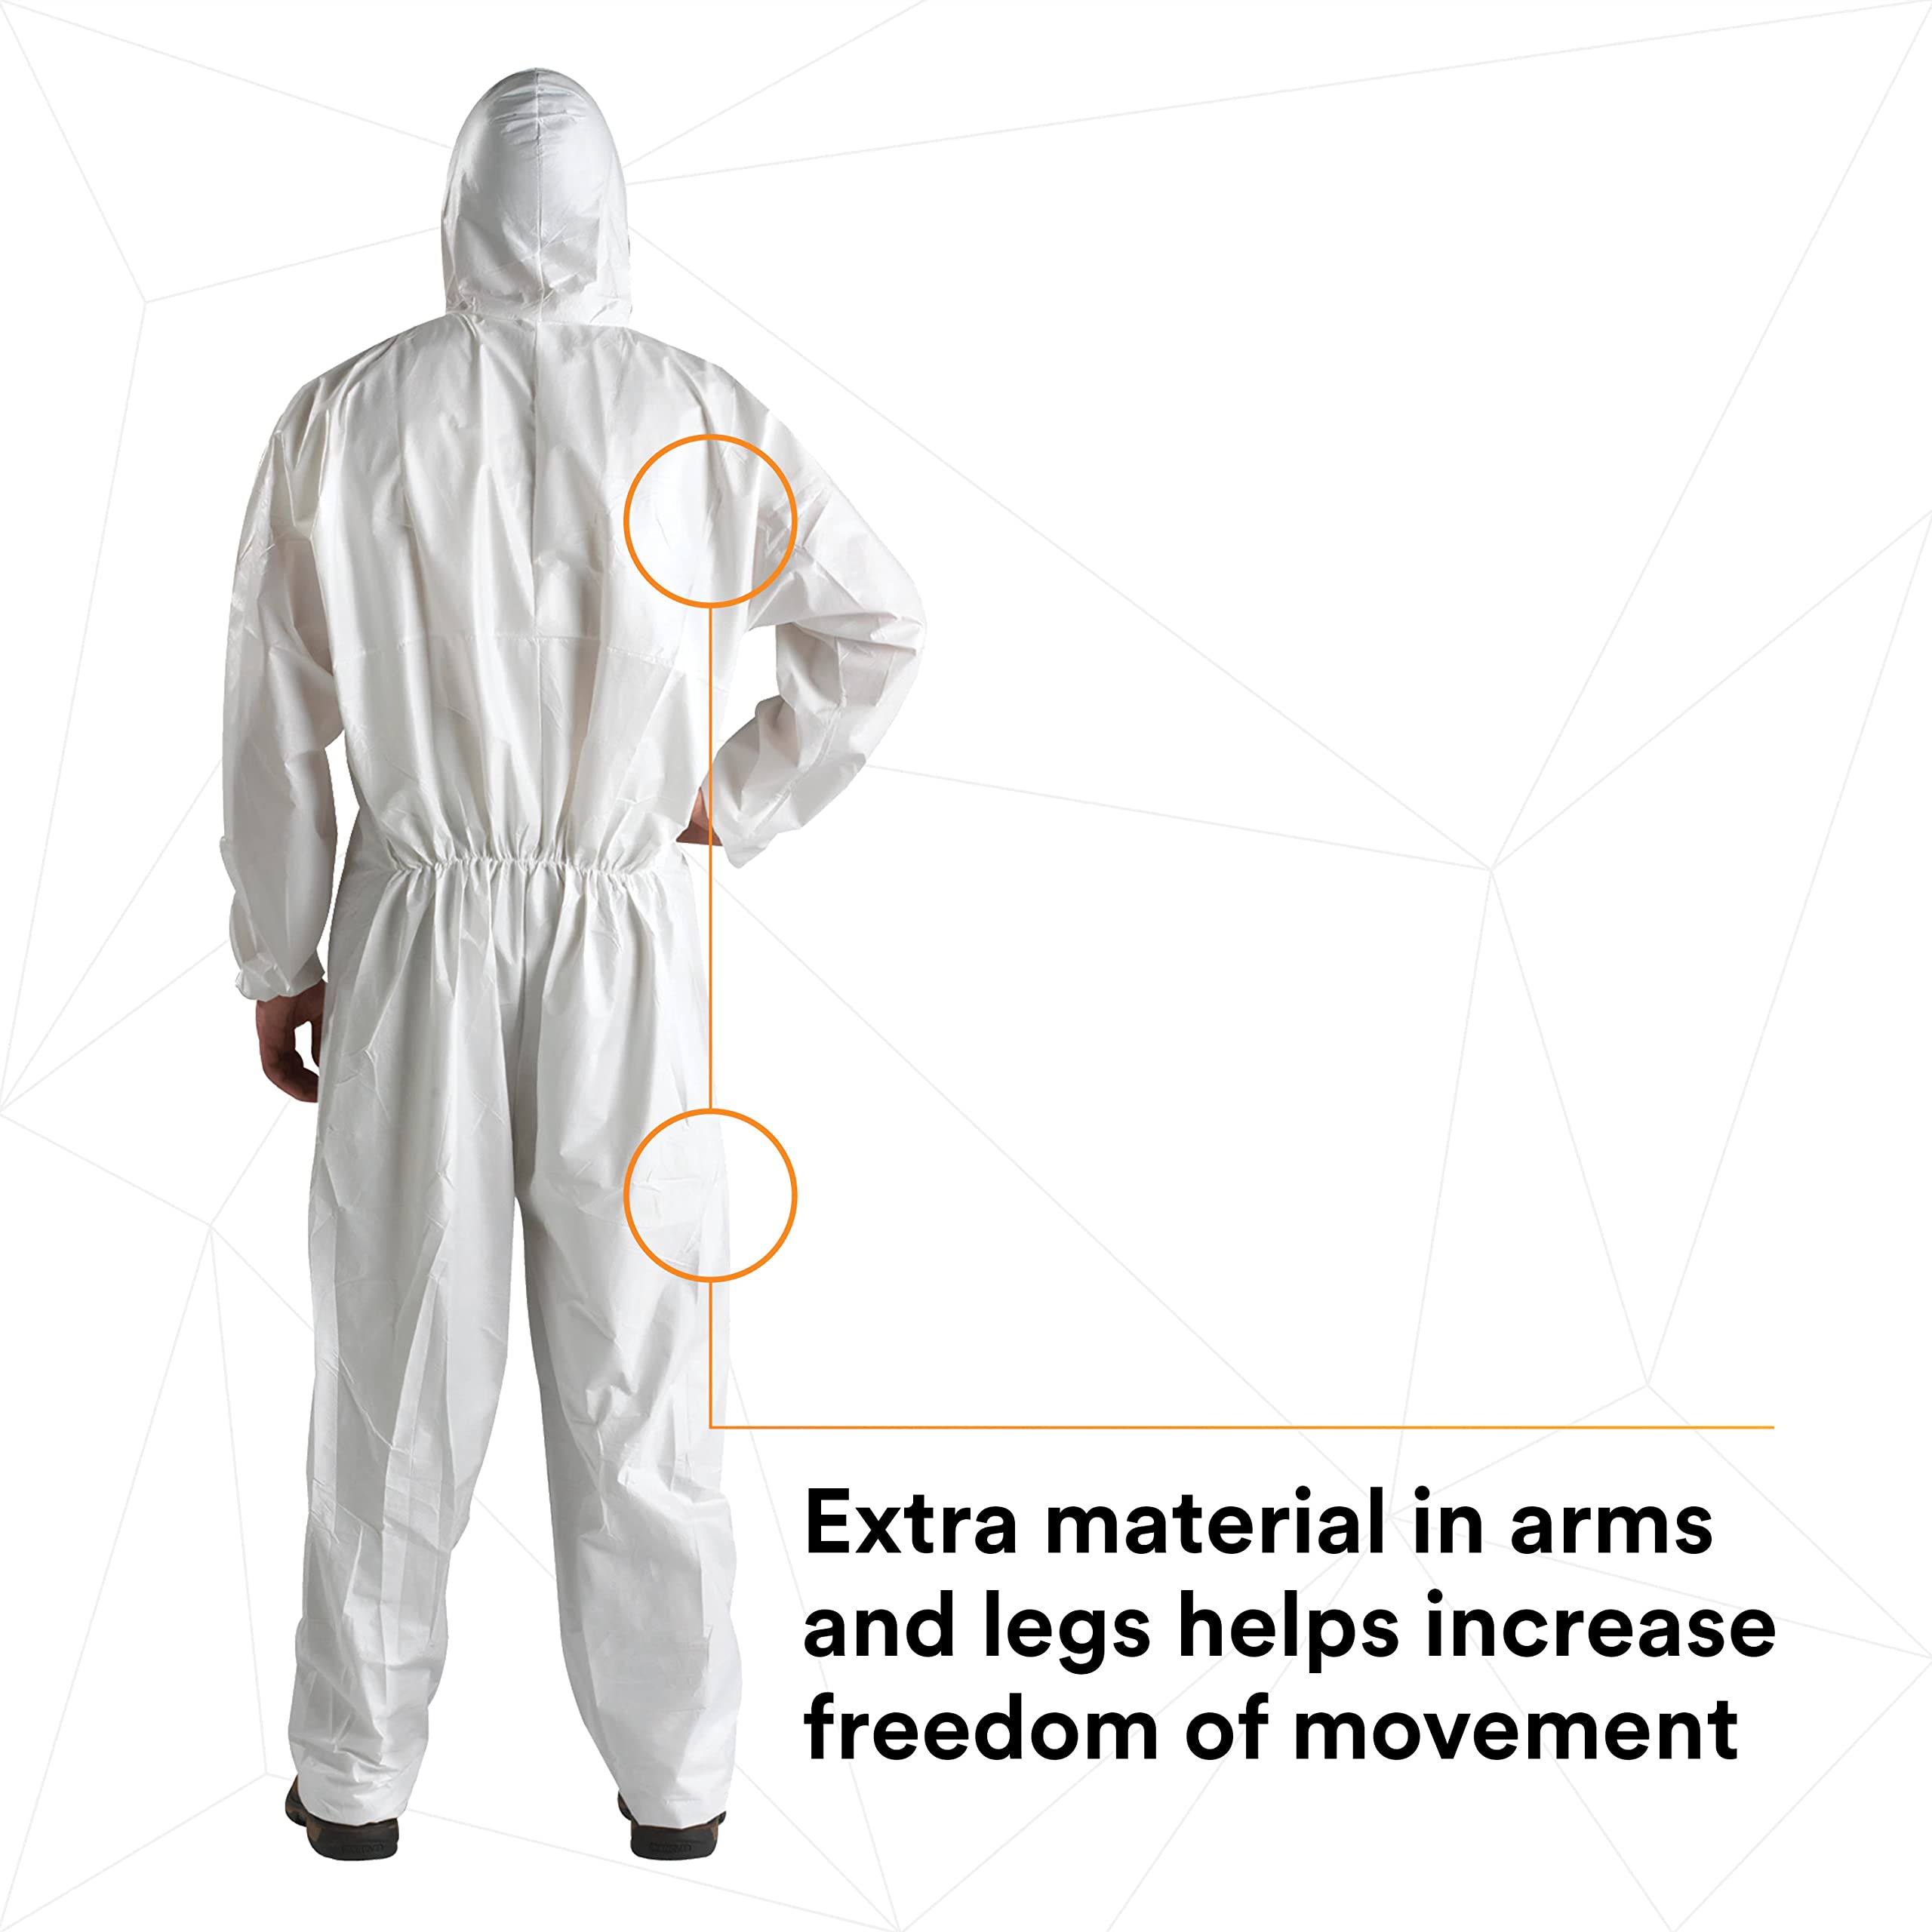 3M Protective Disposable Coveralls, Bulk Pack of 25 White Coveralls, Hooded with Elastic Cuff, Two-way Zipper, Antistatic Protection, XL, 4510-BLK-XL